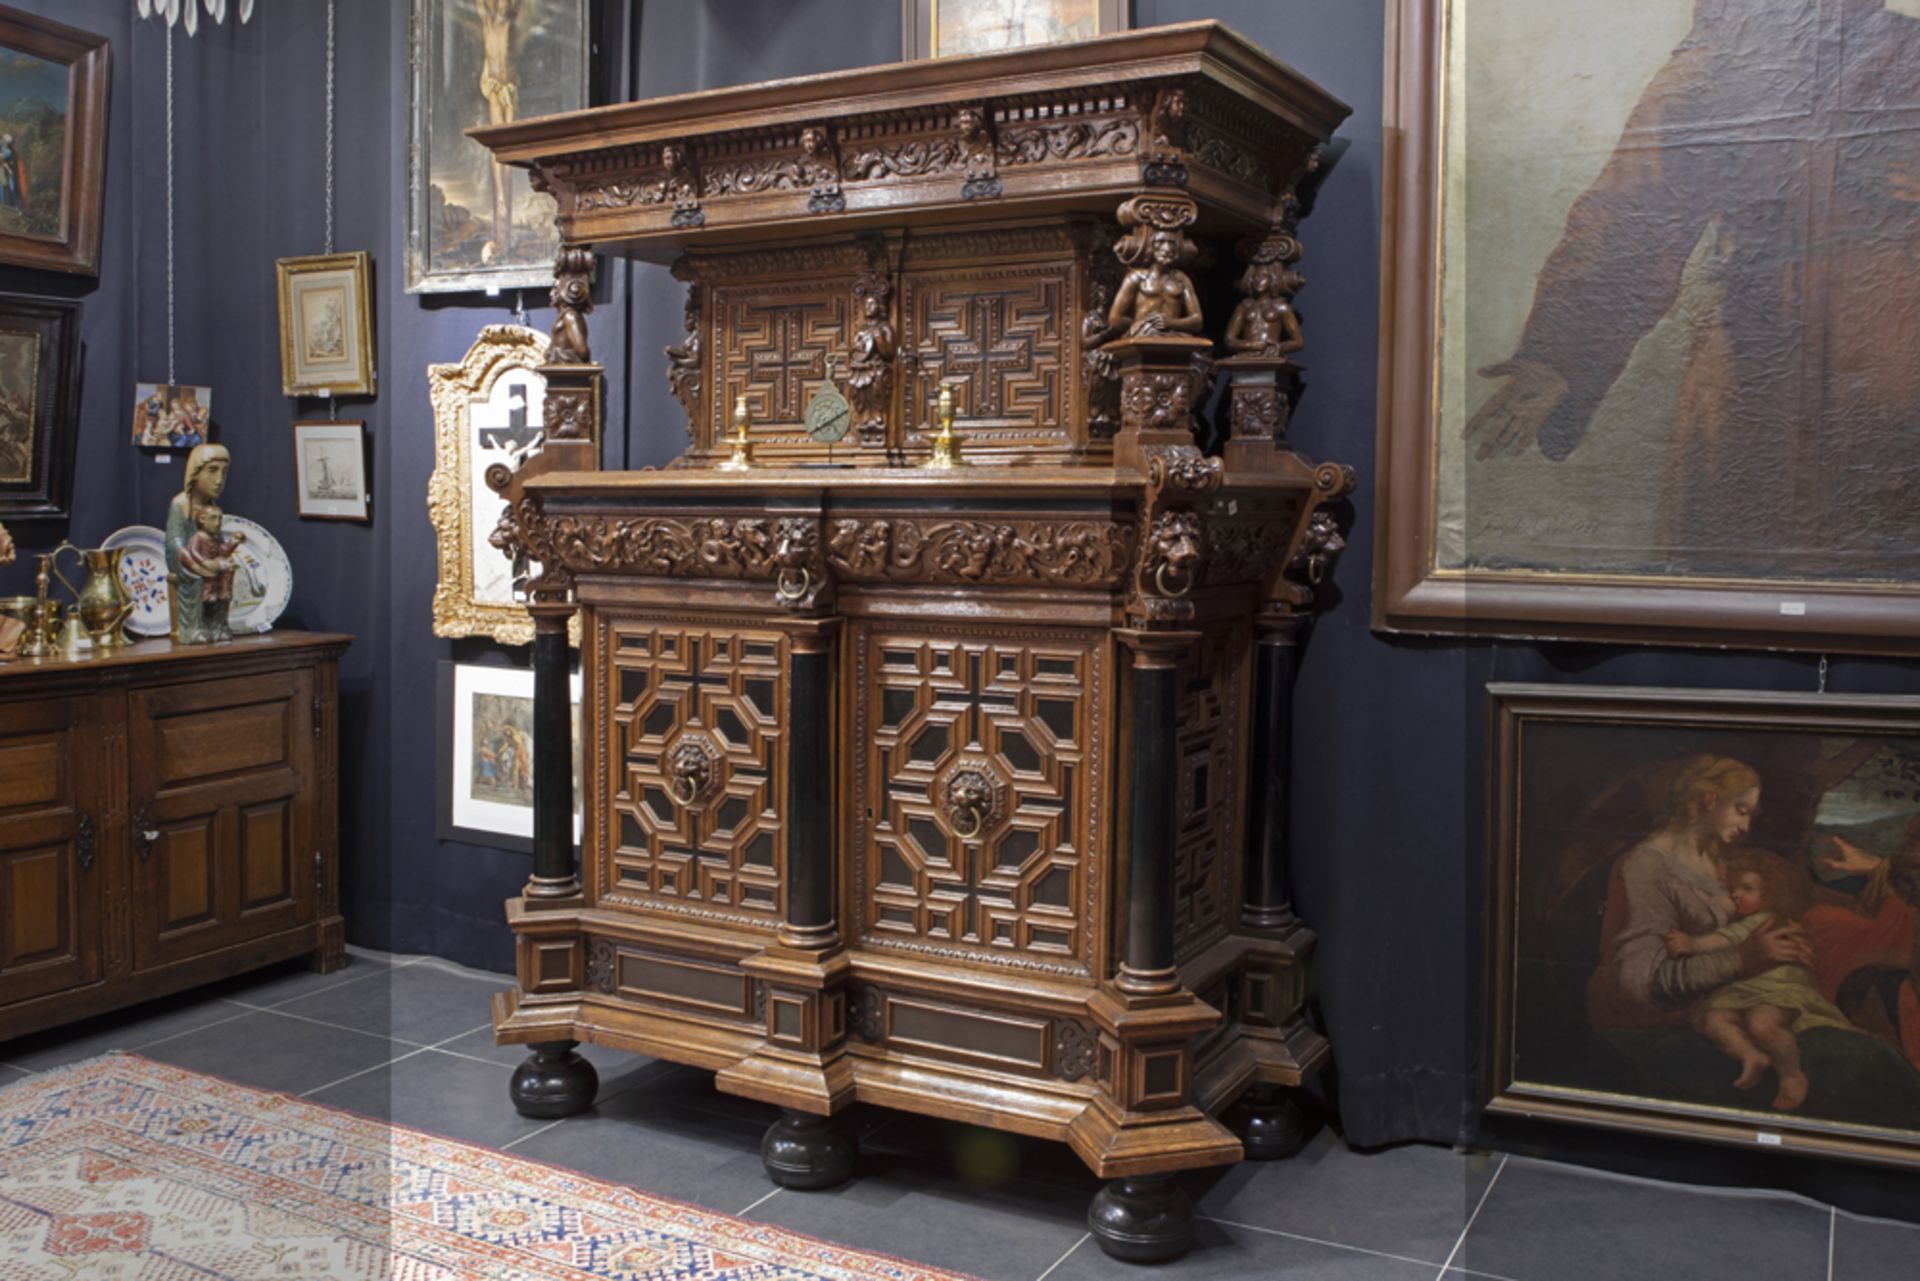 quite impressive 17th/18th Cent. Flemish cabinet/cupboard in oak and ebony with typical rich and